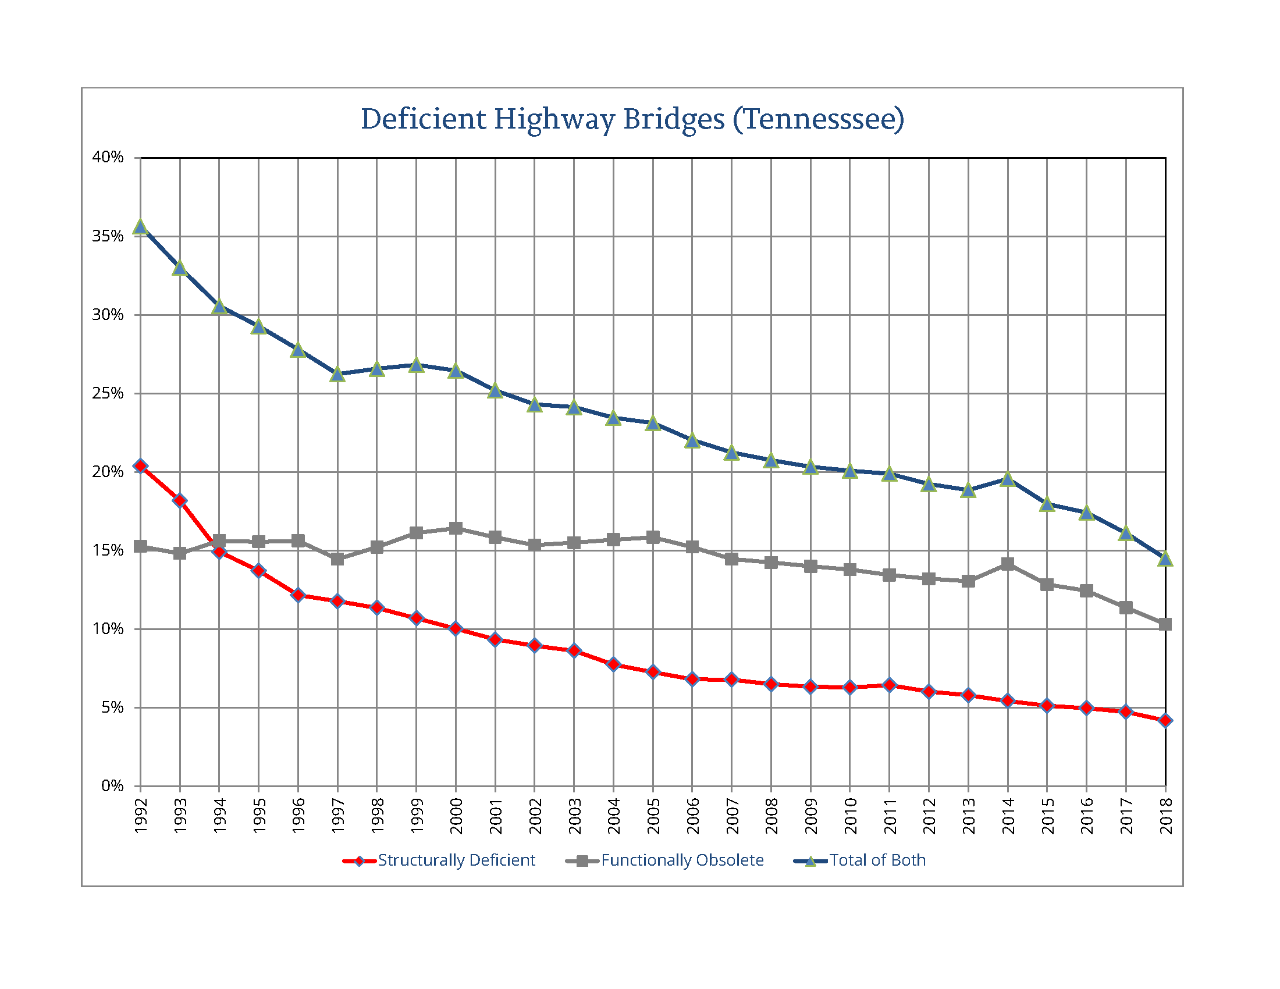 graph representing the number of deficient highway bridges in Tennessee